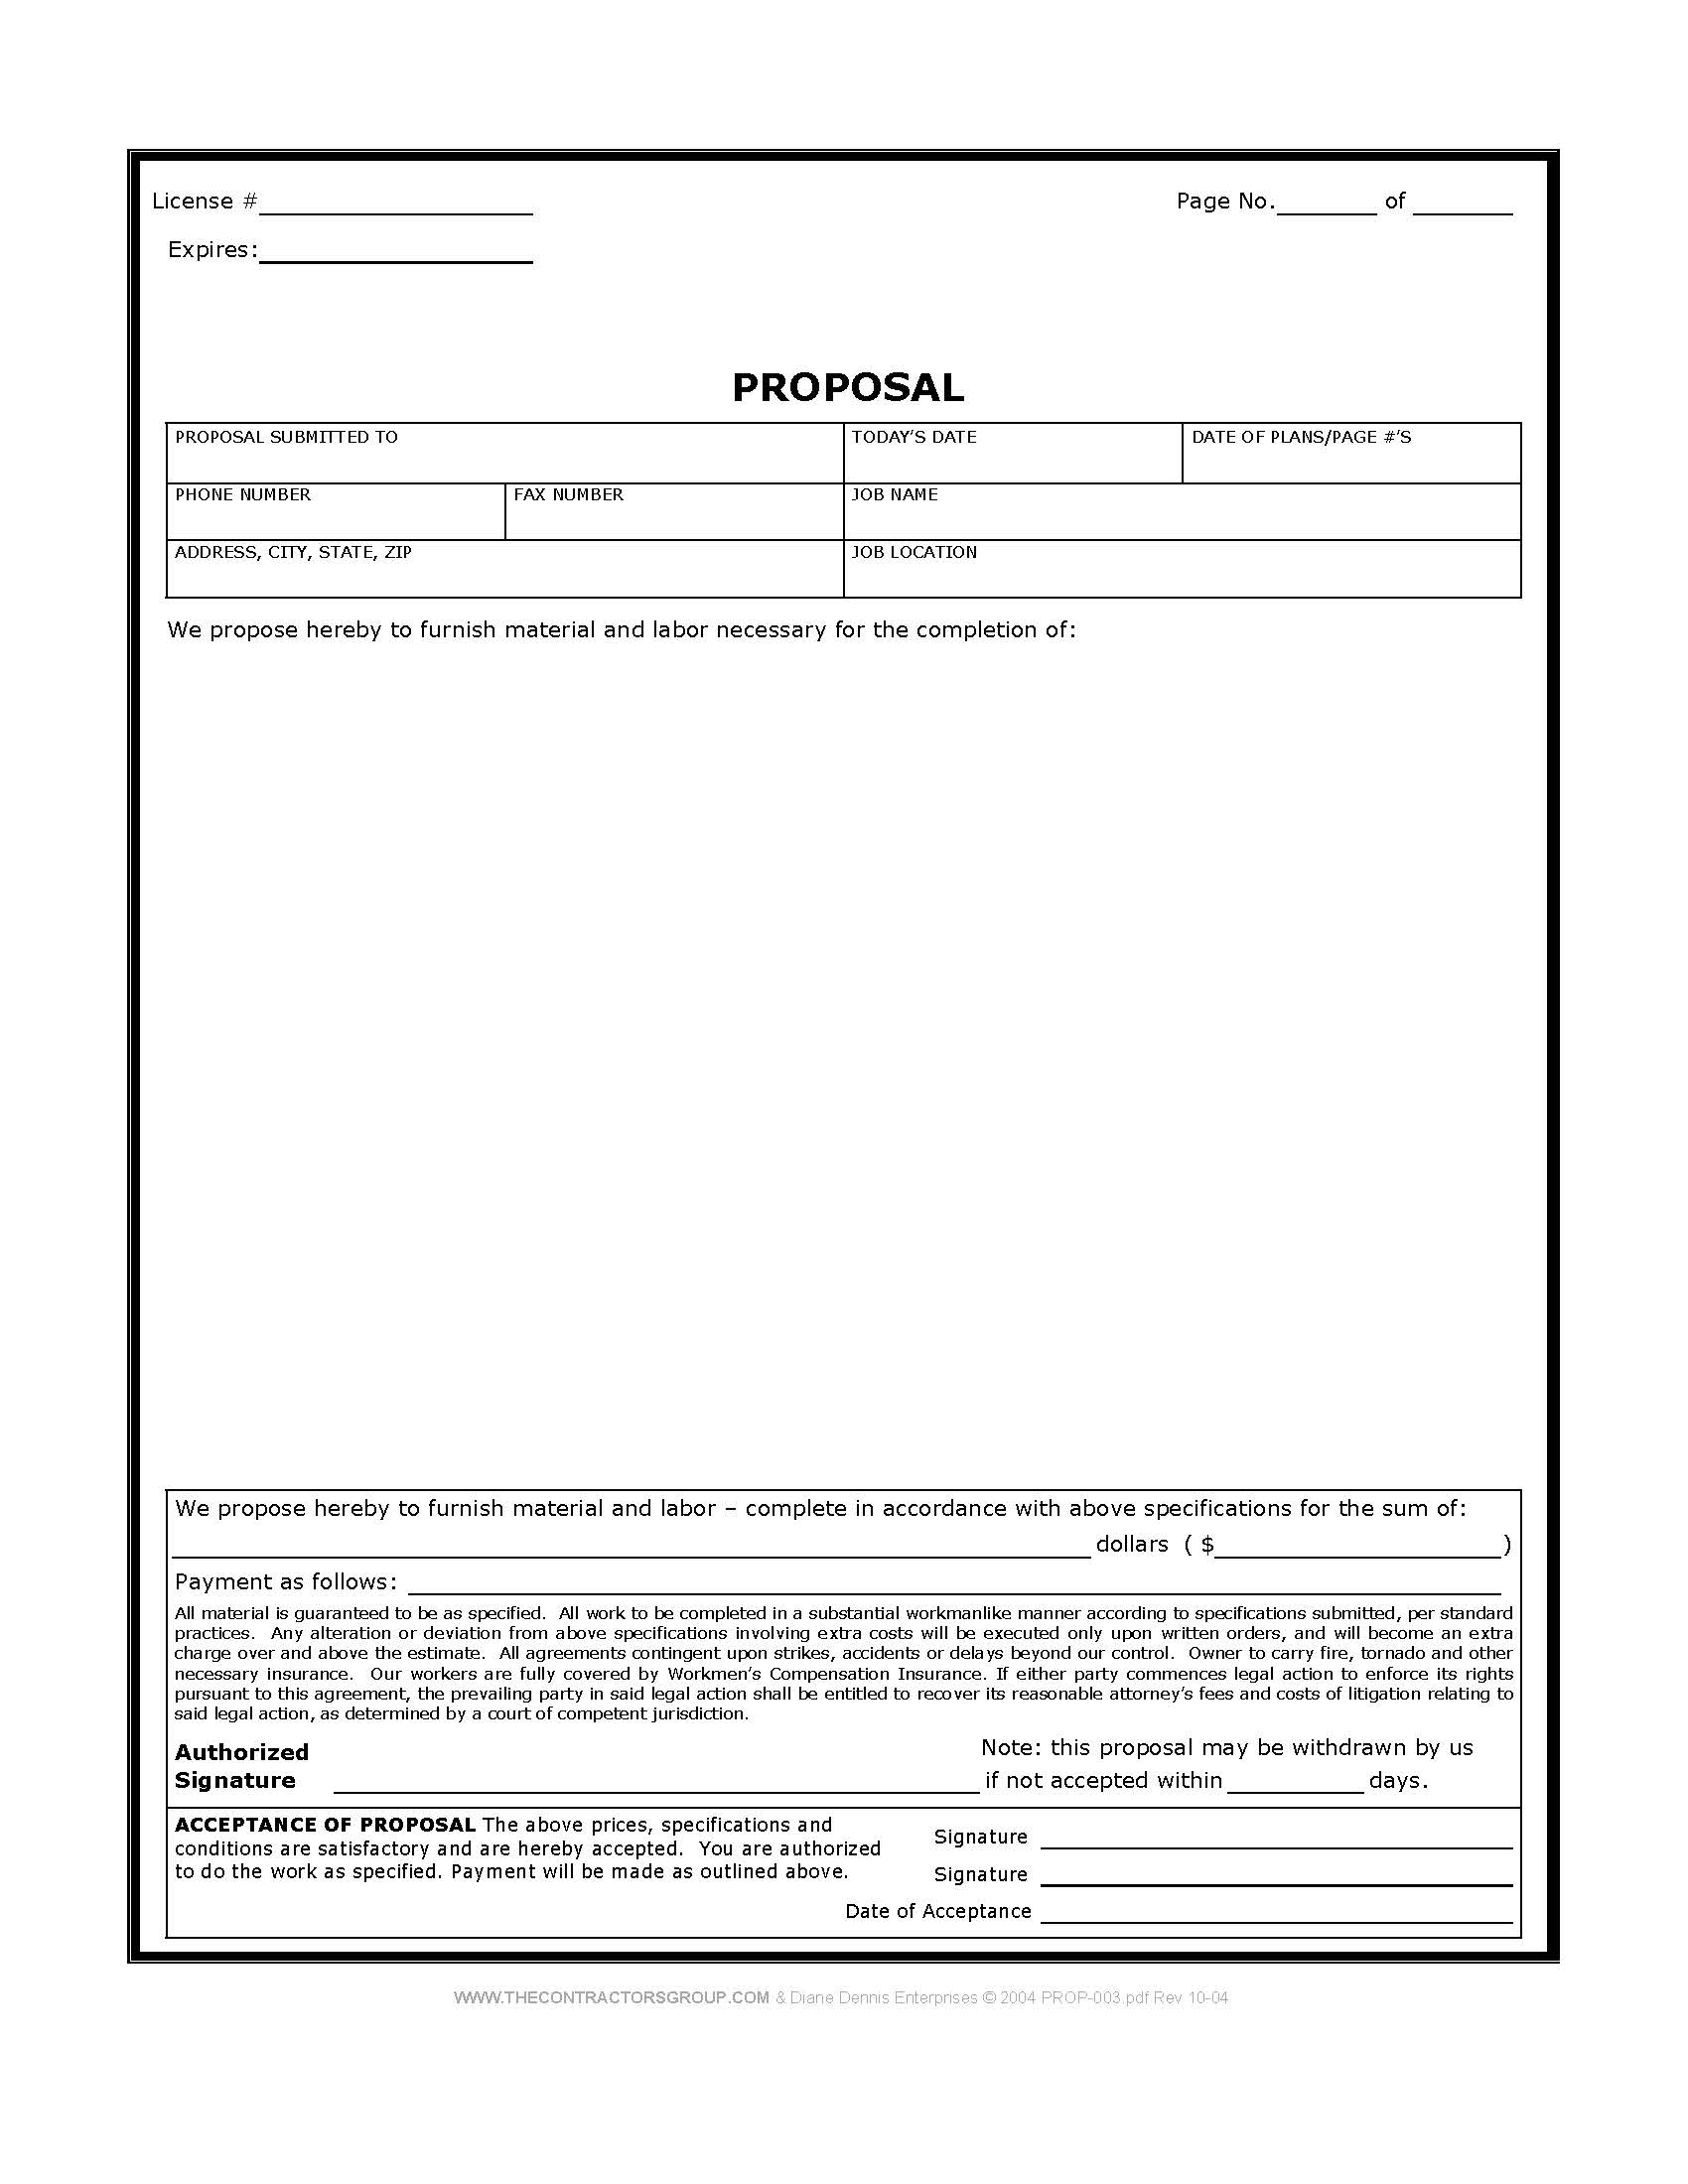 Image of, and link to, a proposal form